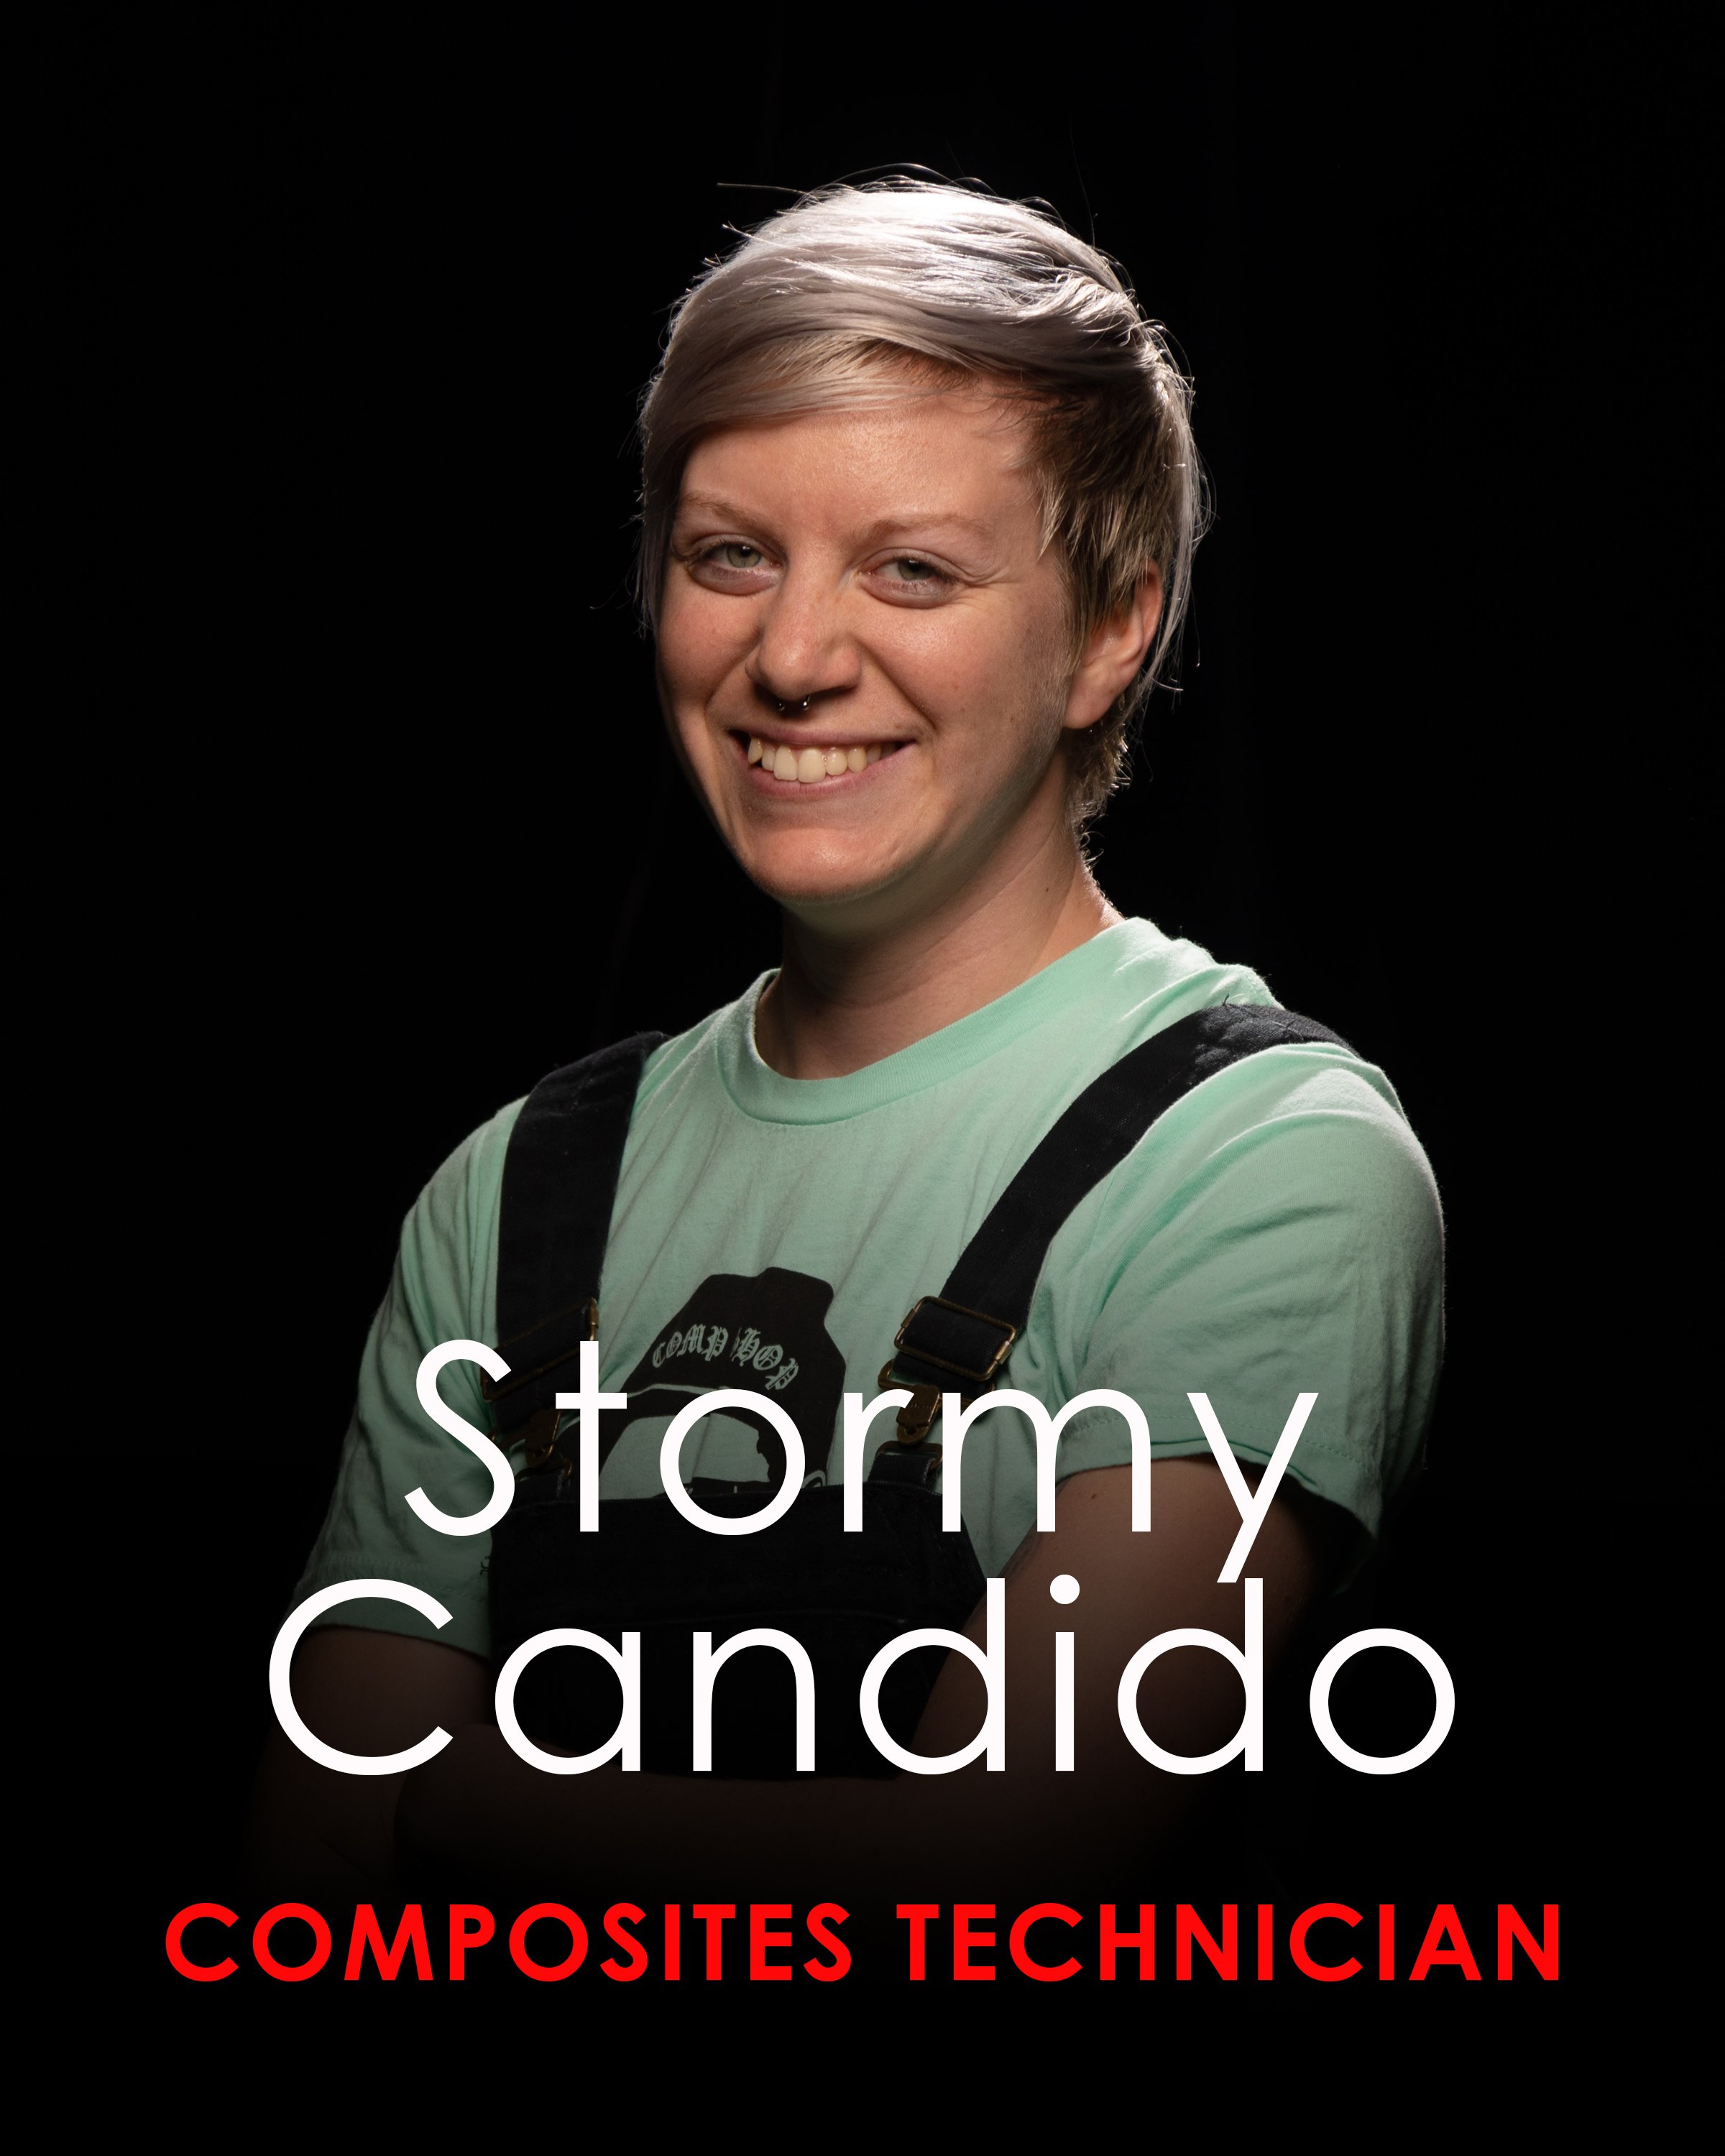 Candido_Stormy_Composites.jpg